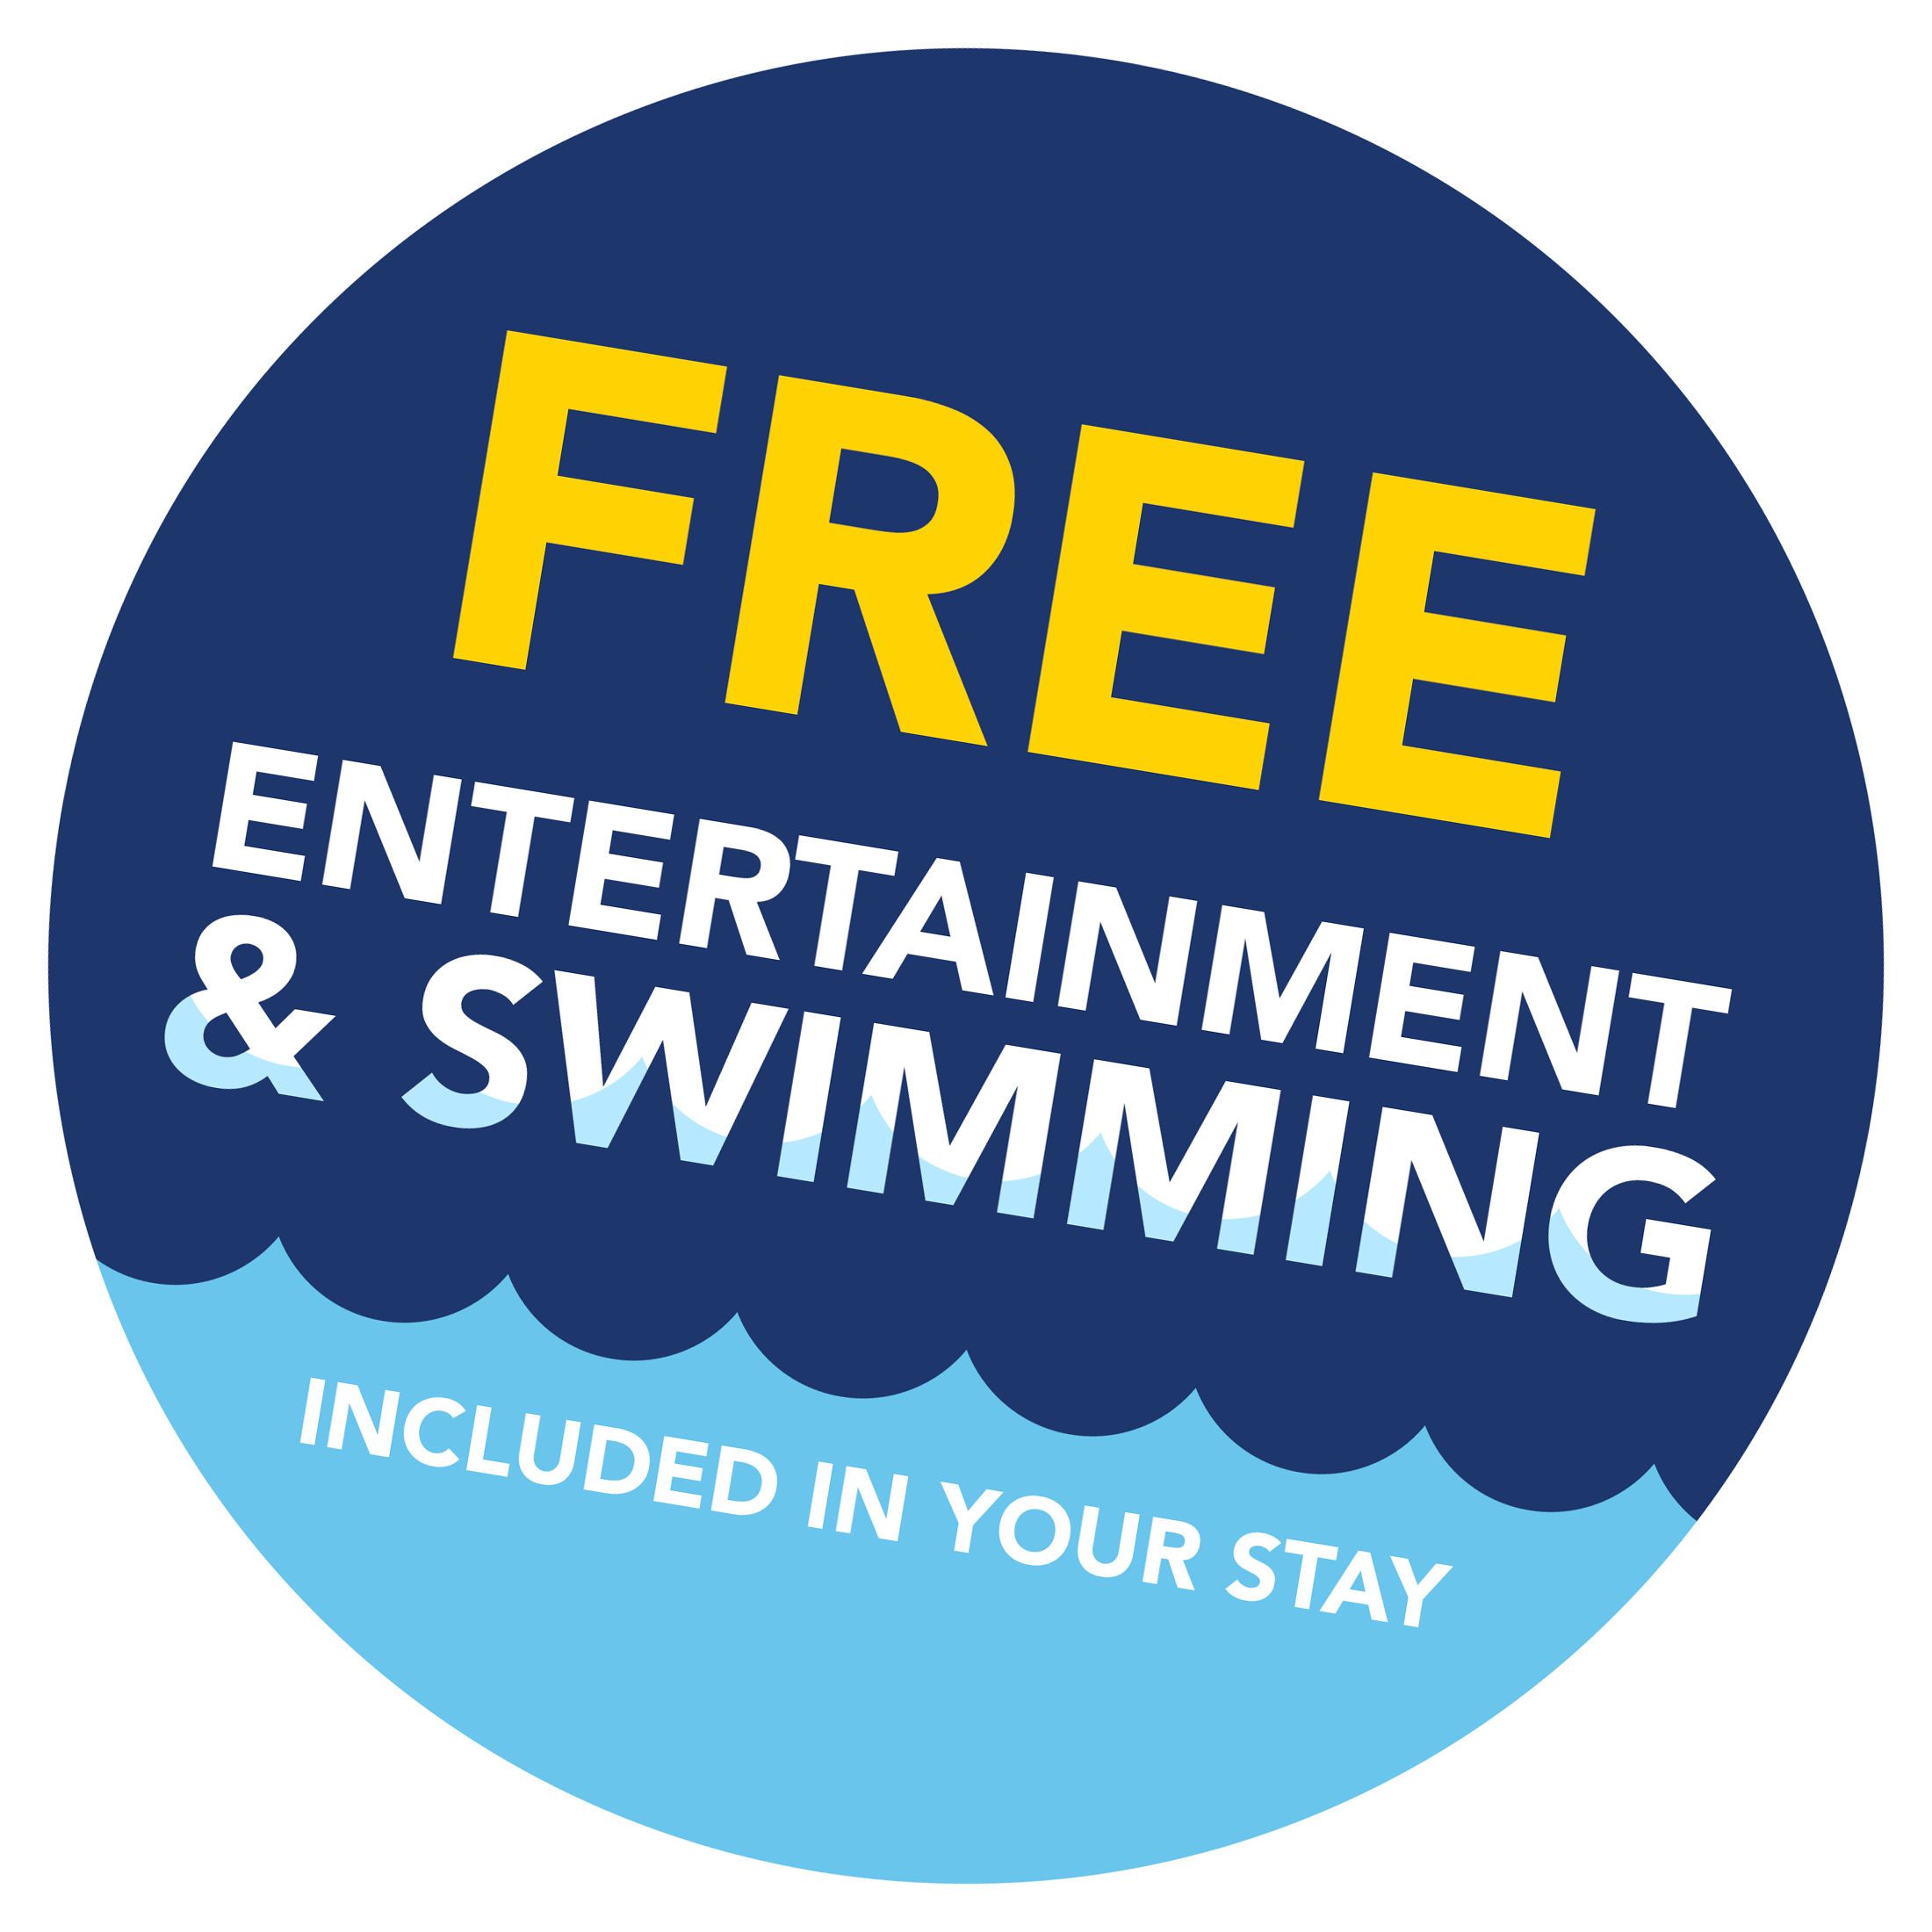 Free swimming and entertainment roundel